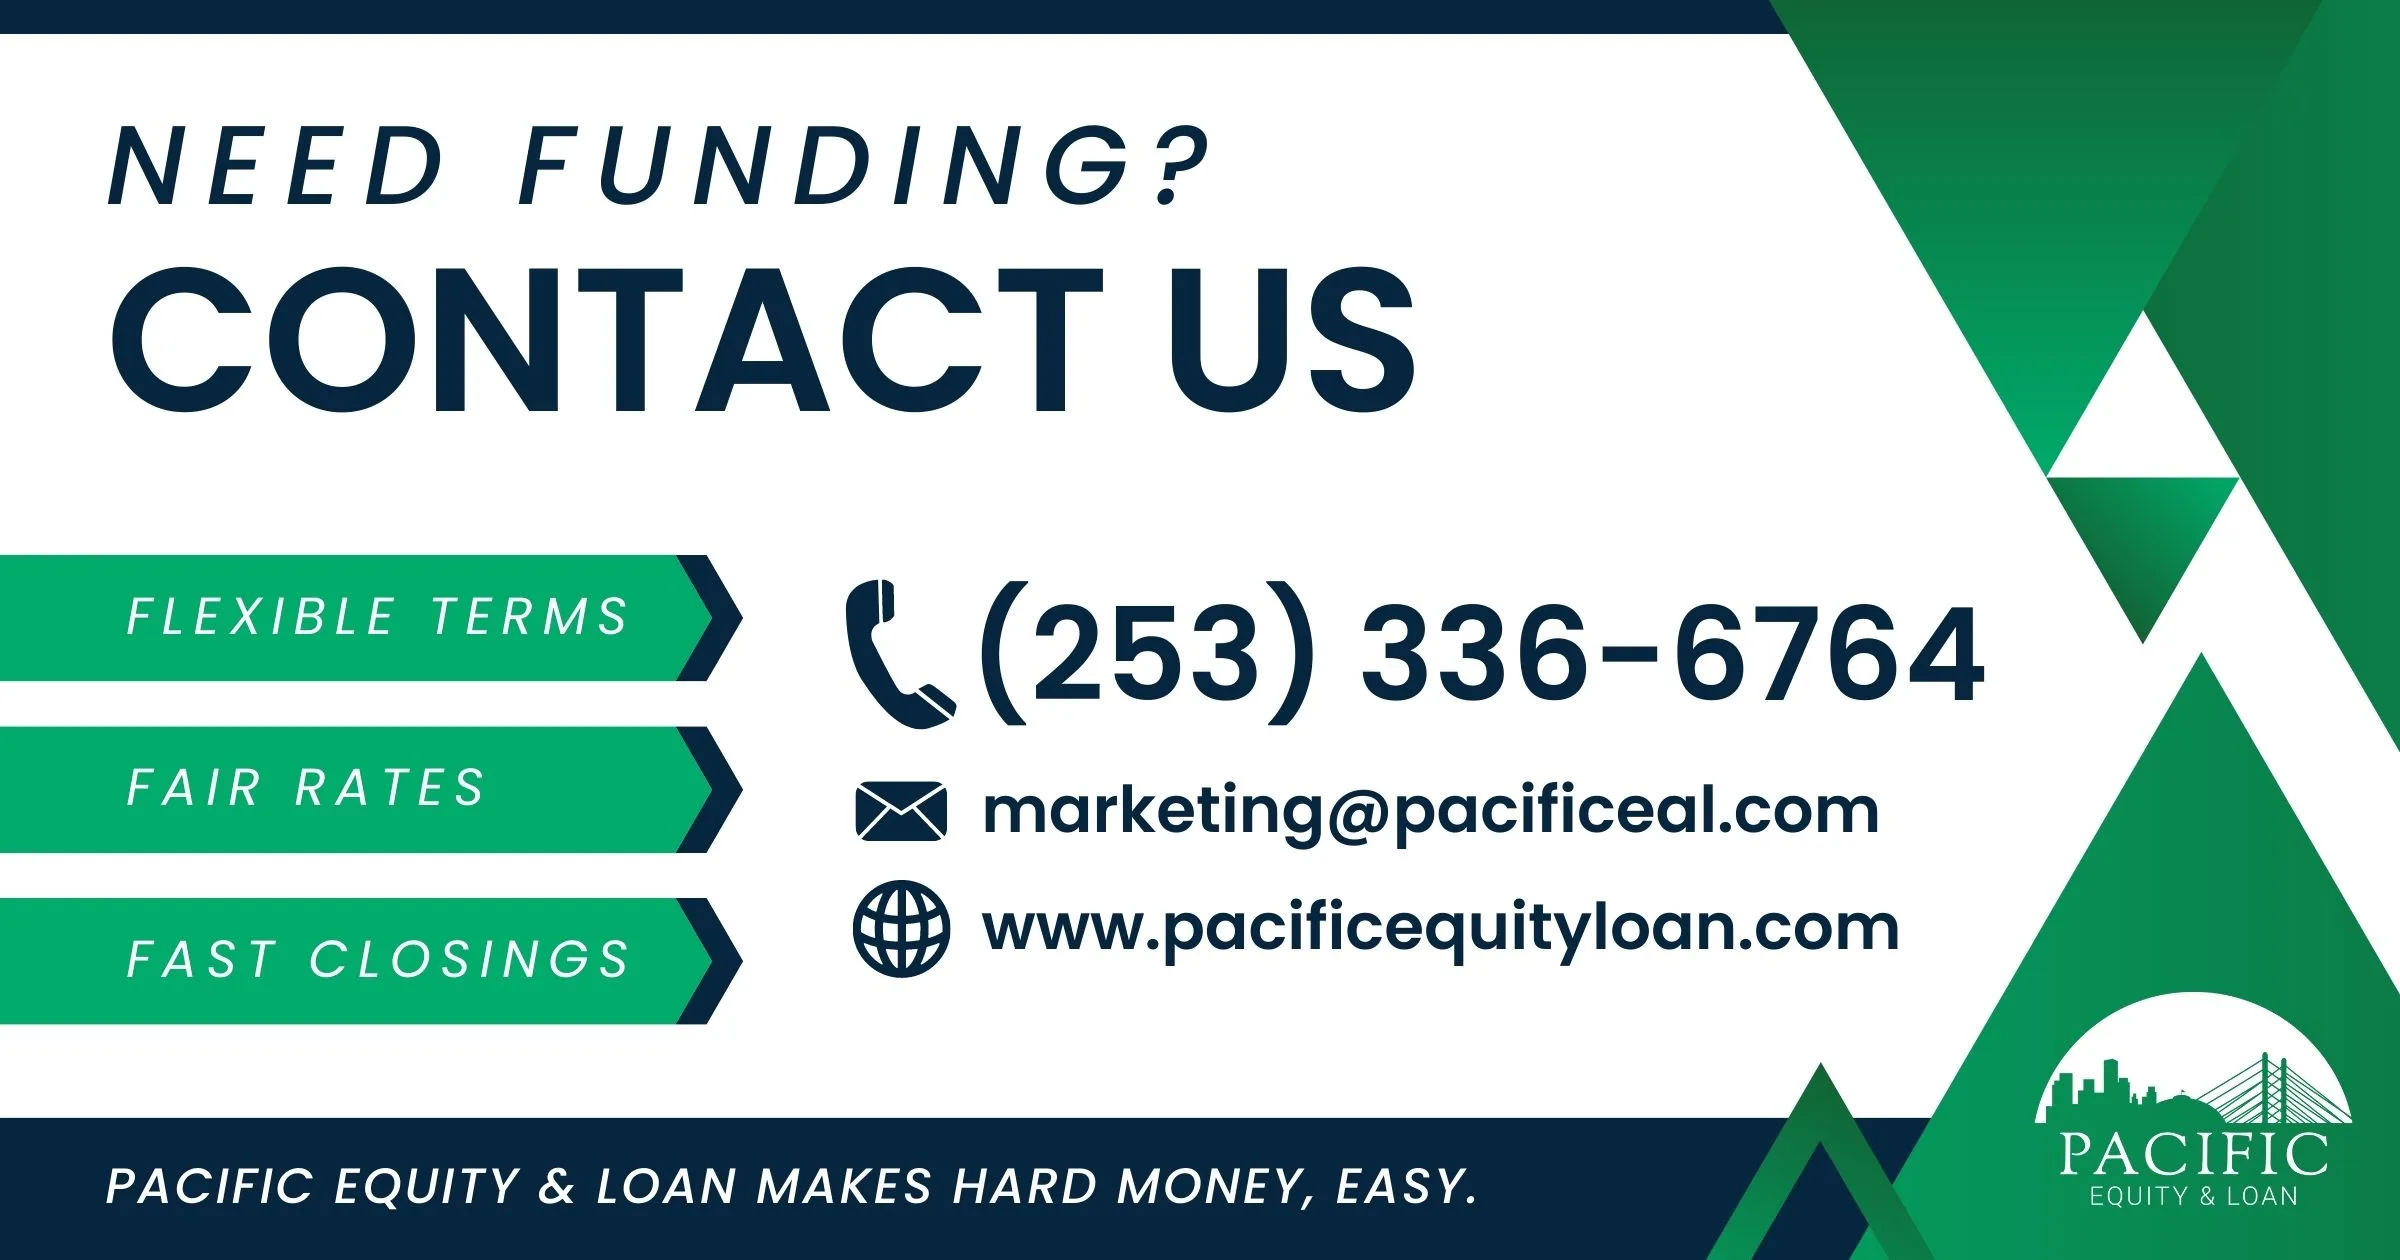 Contact Pacific Equity & Loan